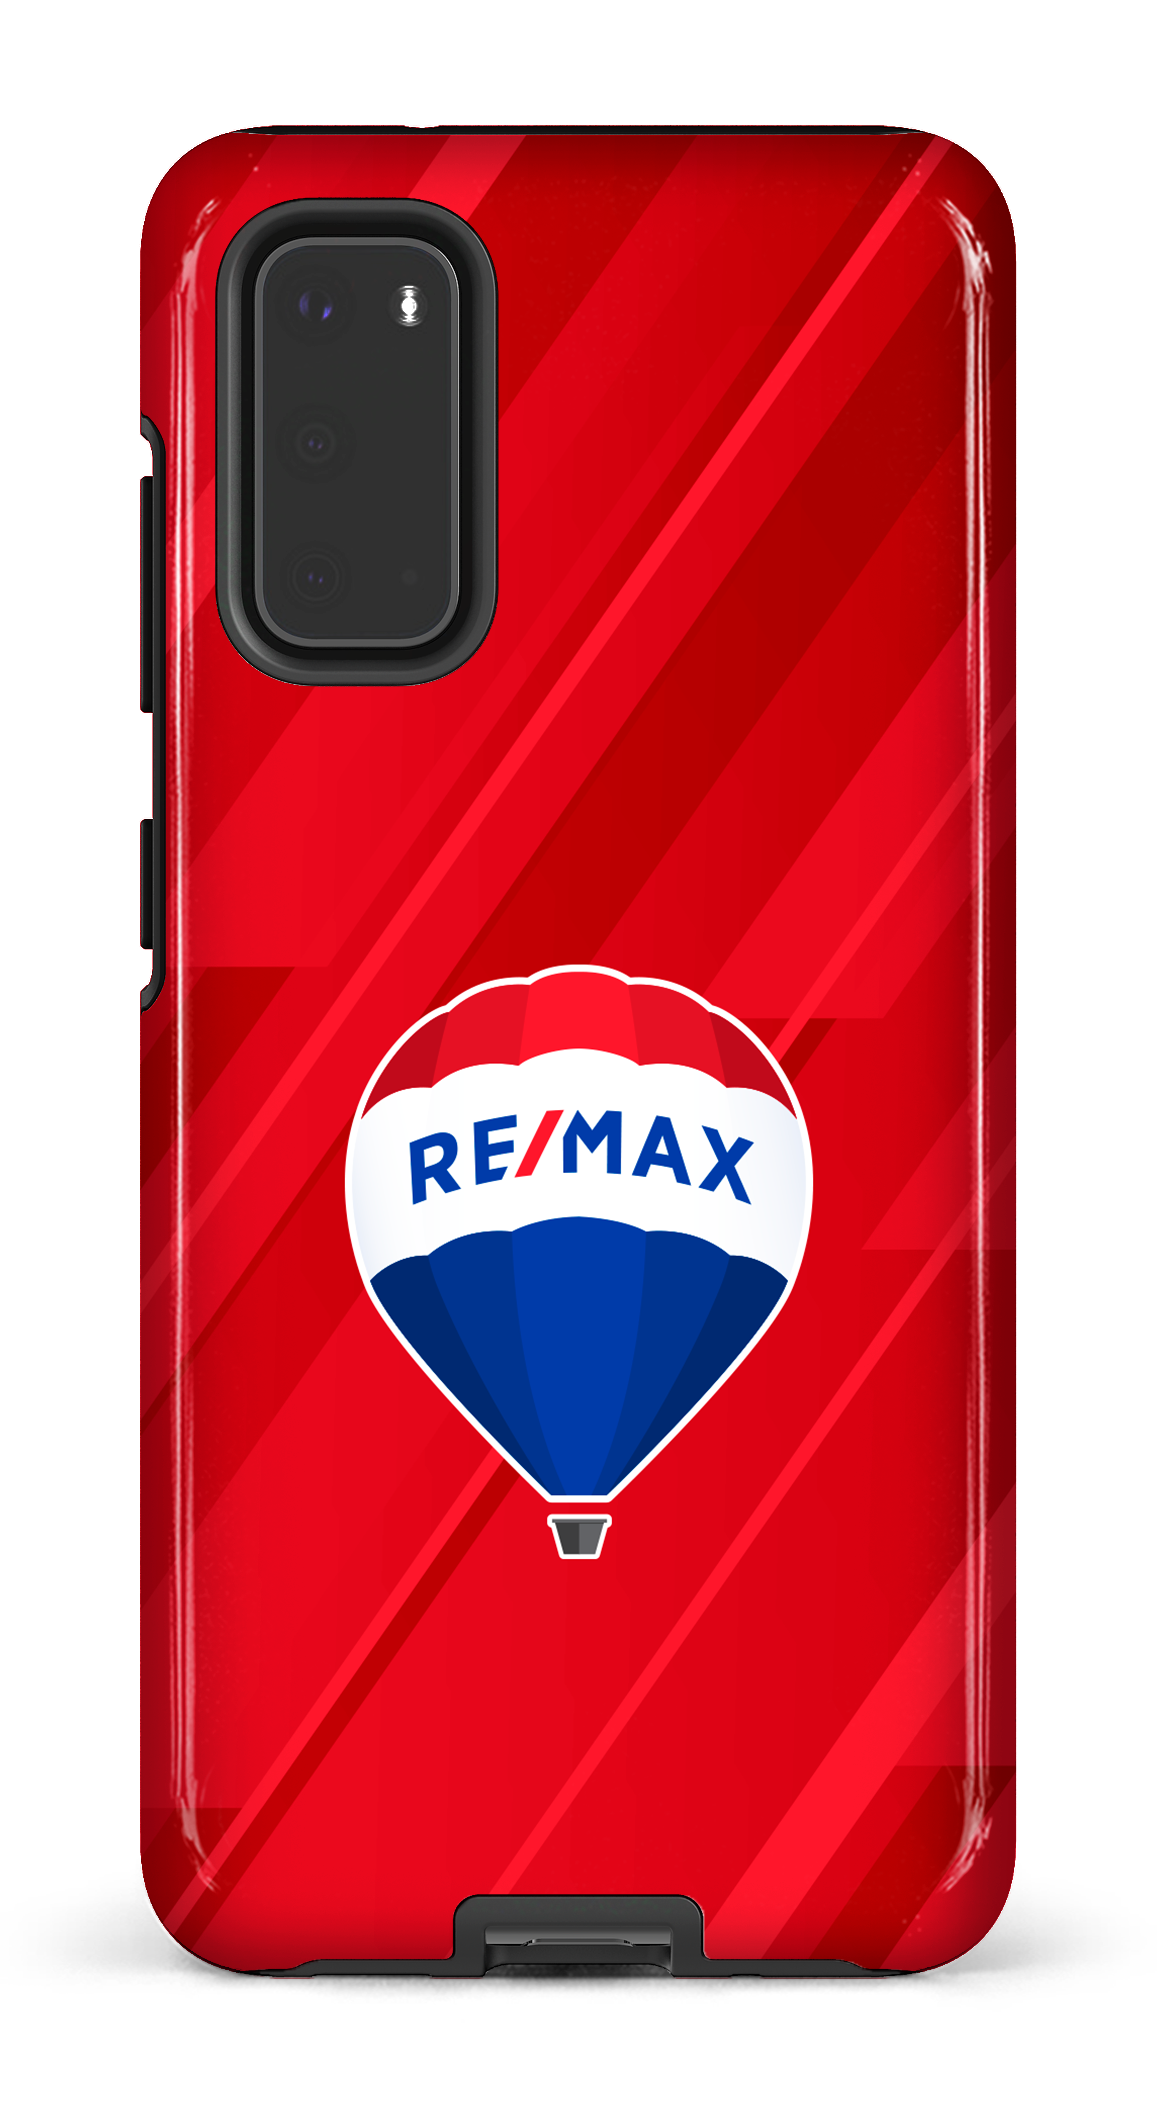 Remax Rouge - Galaxy S20